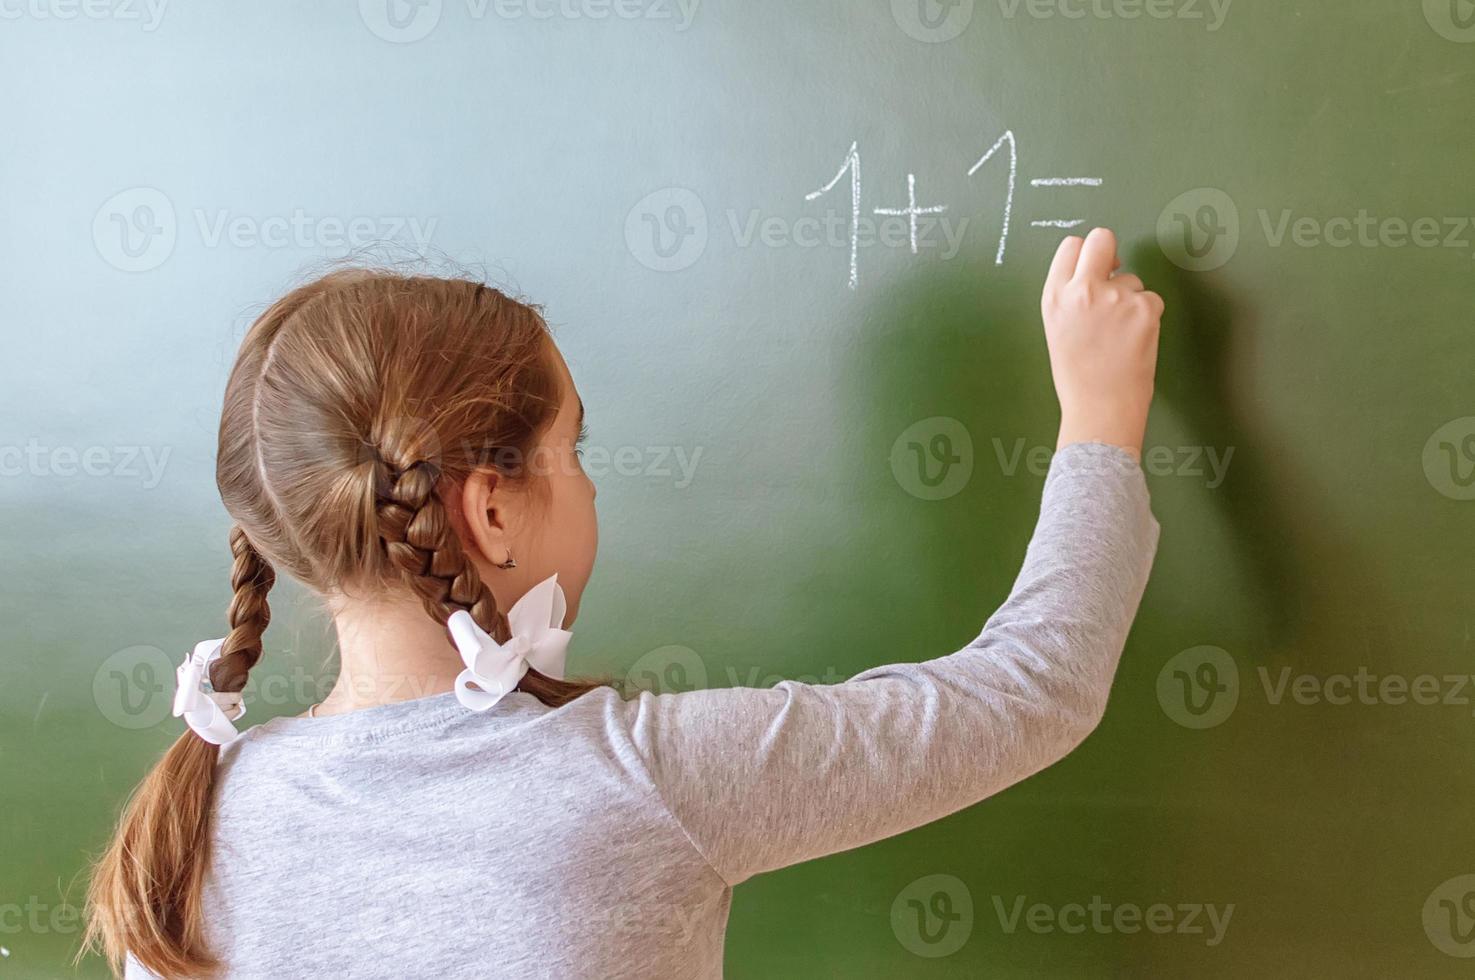 Schoolgirl solves a math problem on the blackboard during the lesson. photo